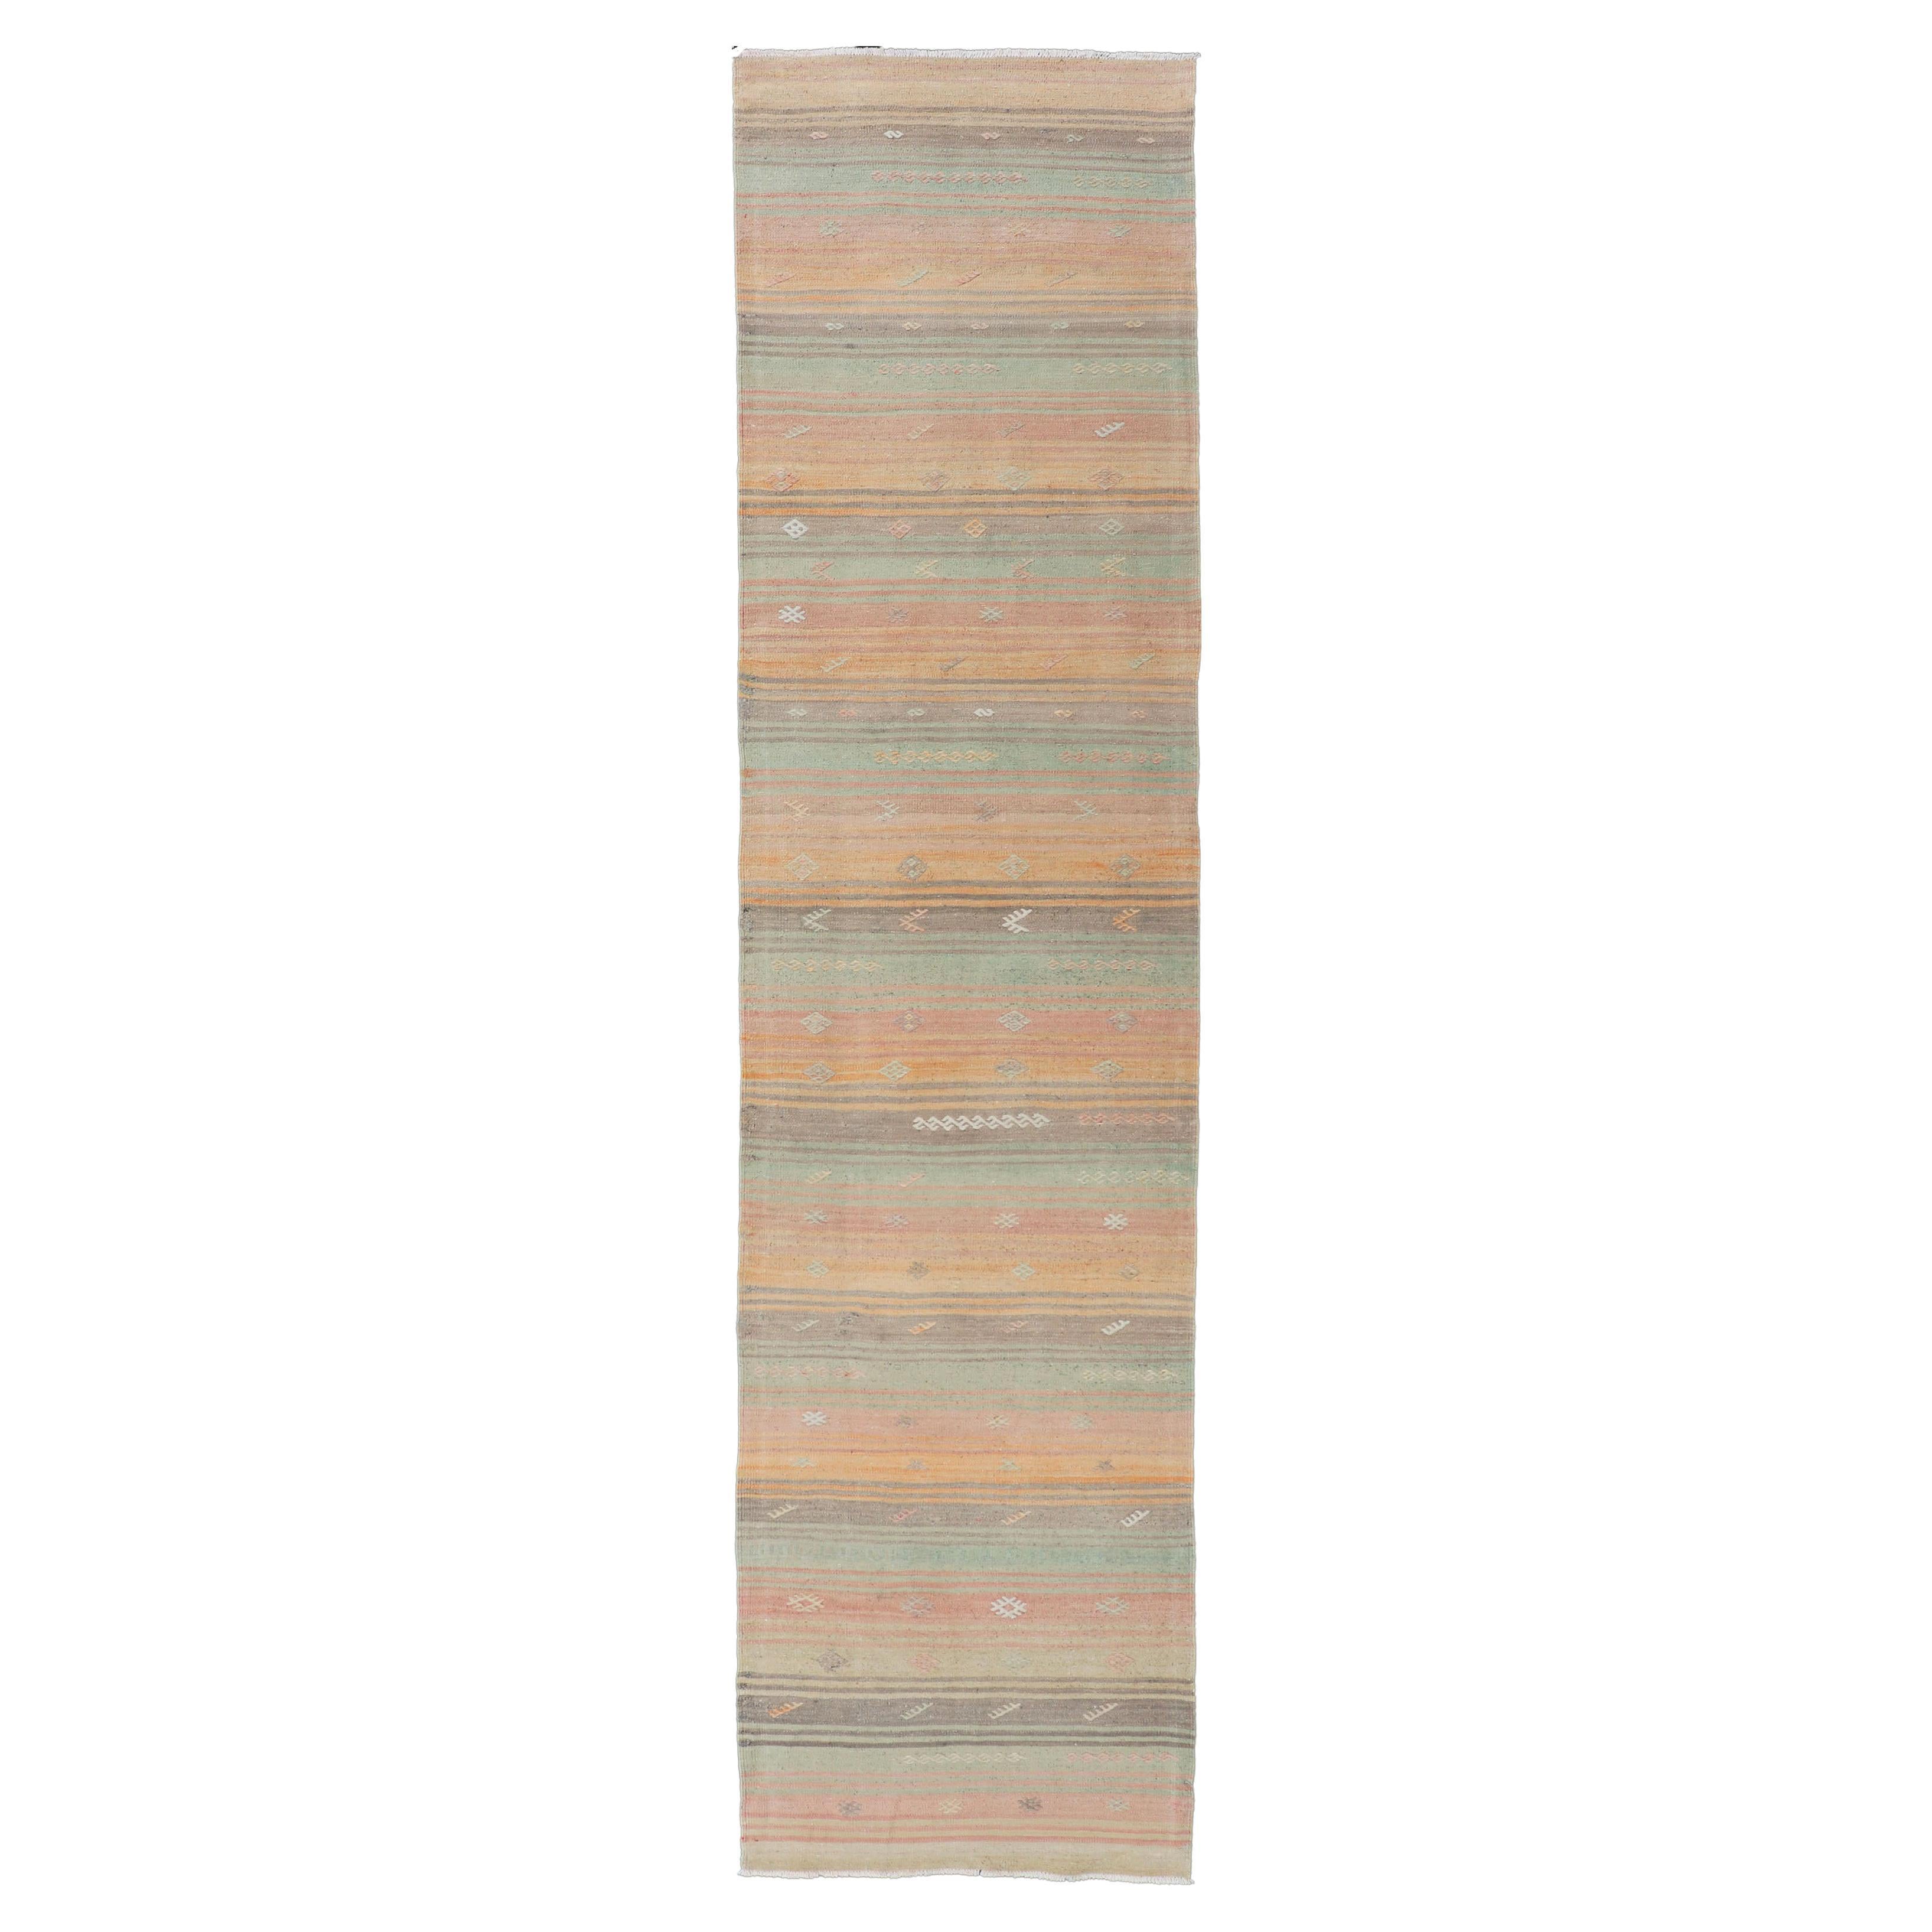 Vintage Turkish Kilim Runner with Stripes in Multi Soft Colors